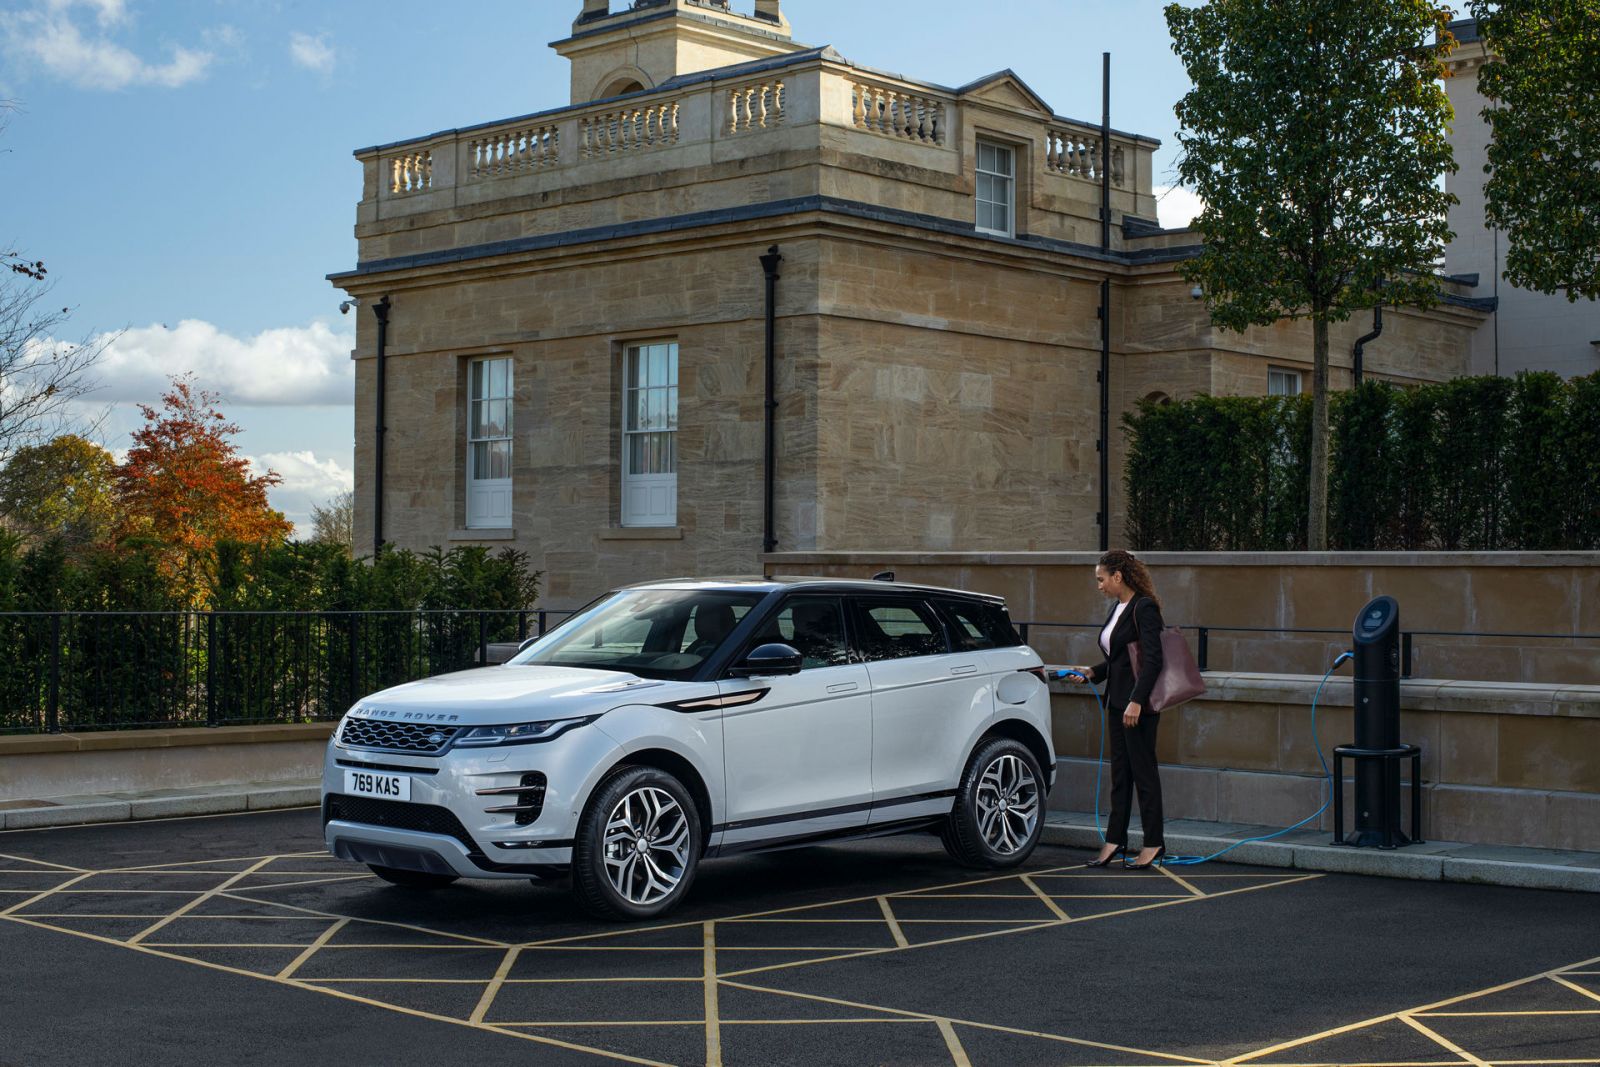 Range Rover Evoque and Land Rover Discovery Sport with Plug-In Hybrid